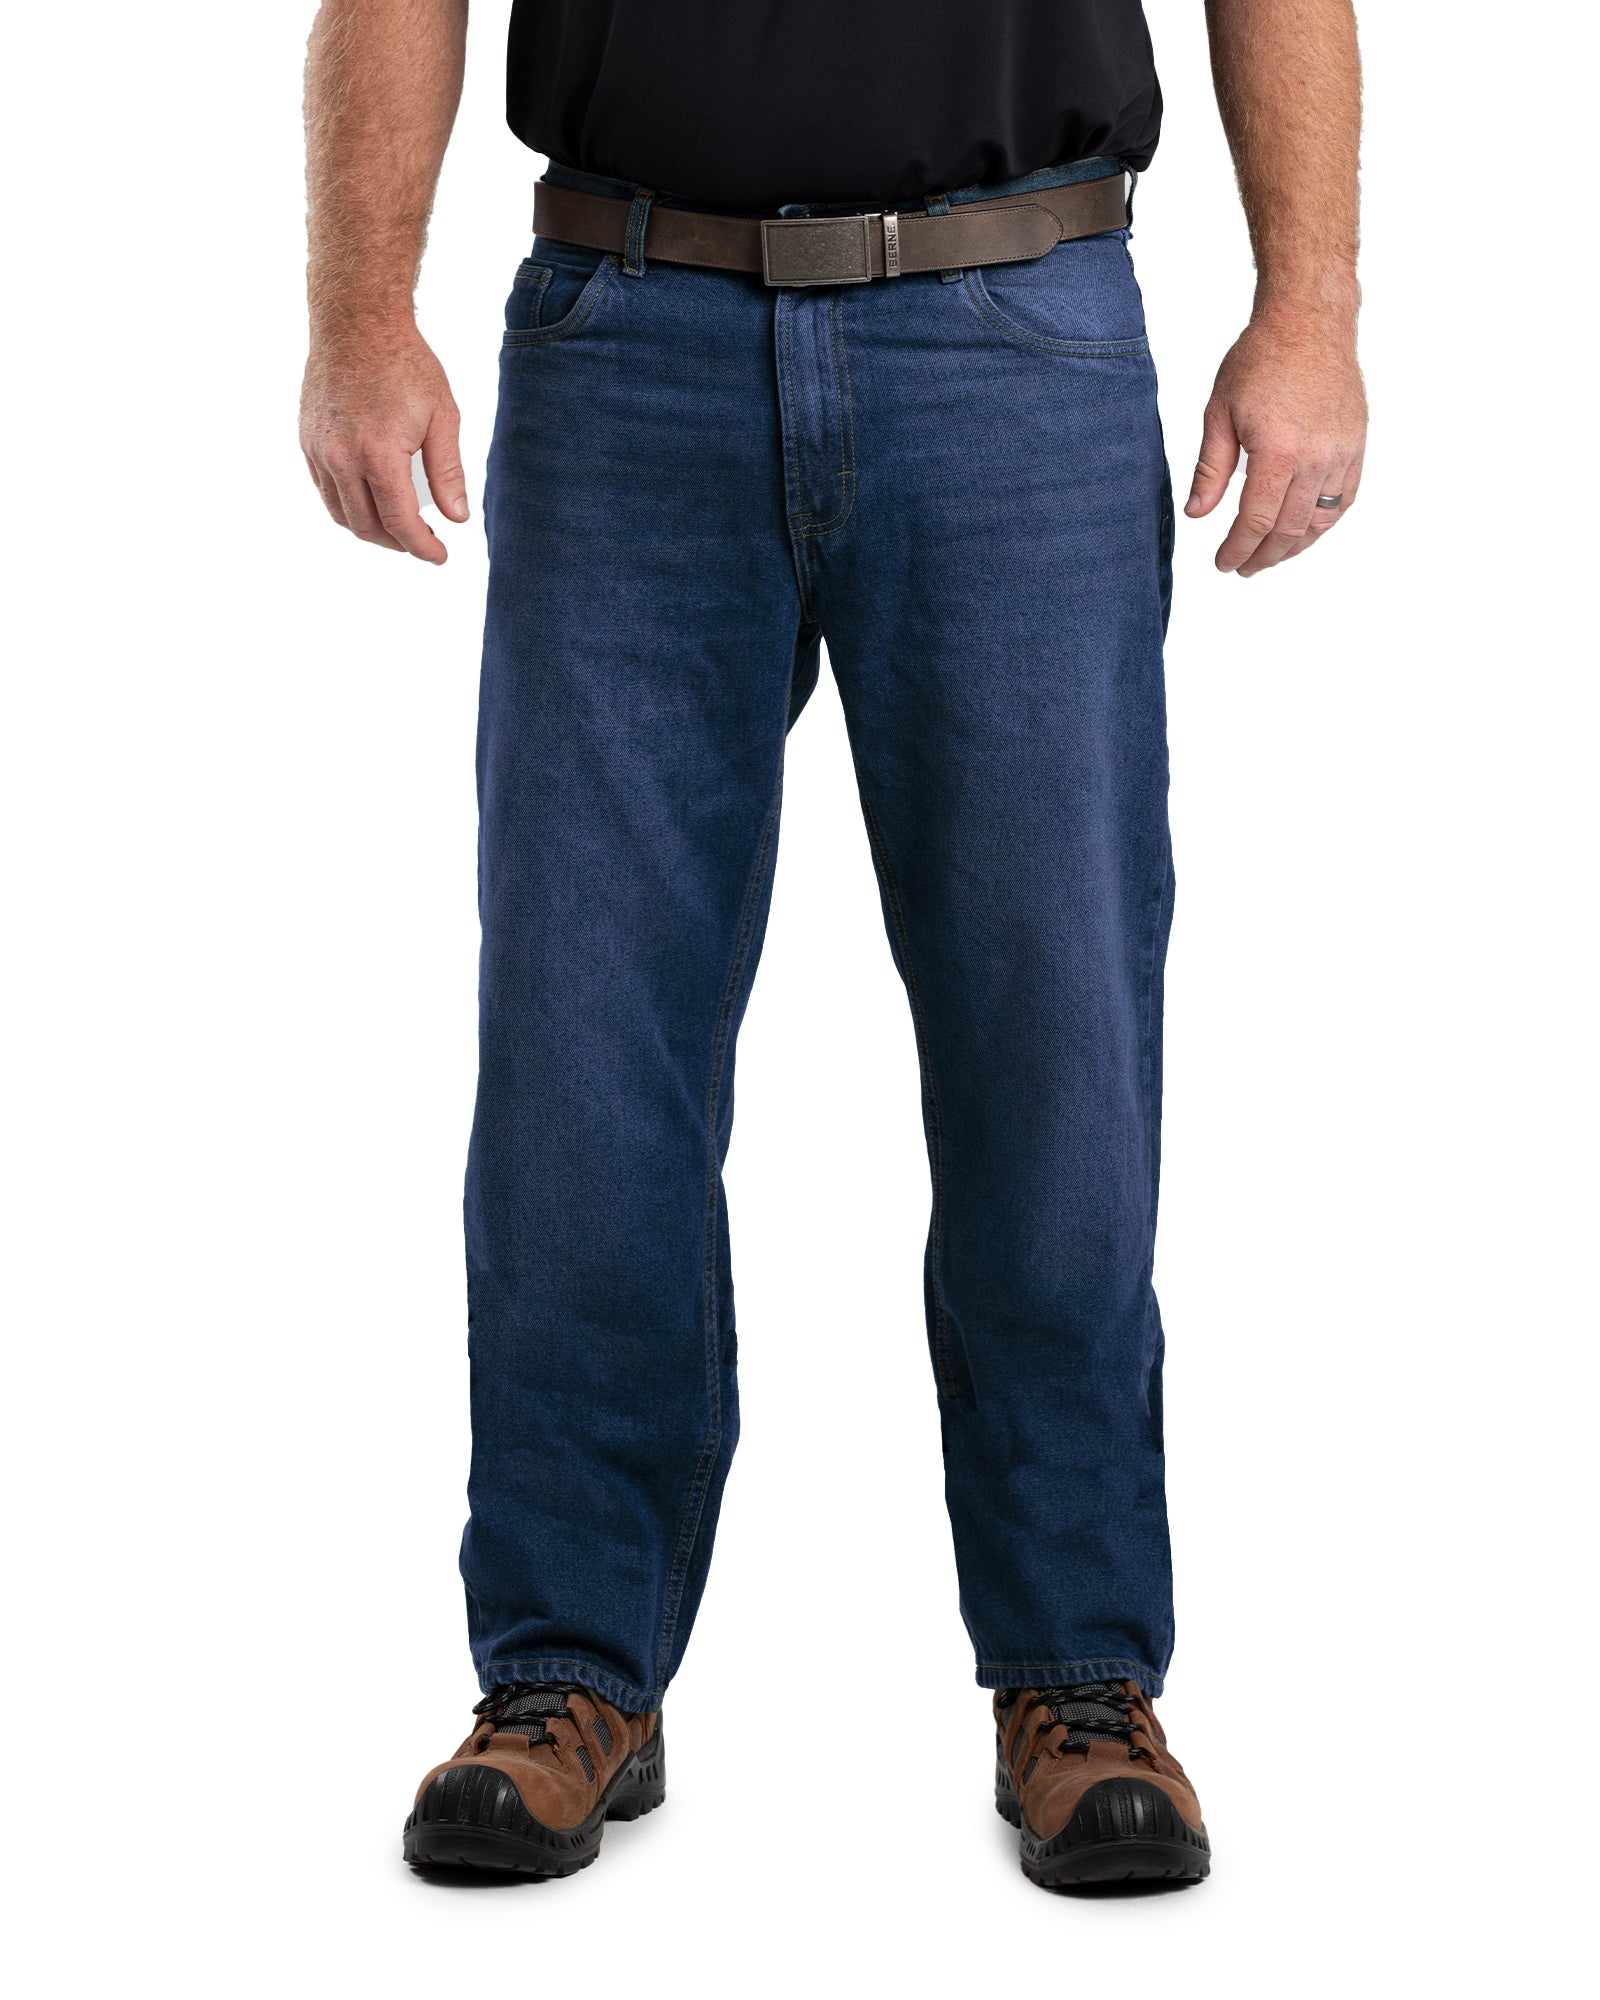 CARPENTER JEANS RELAXED FIT | DENIM